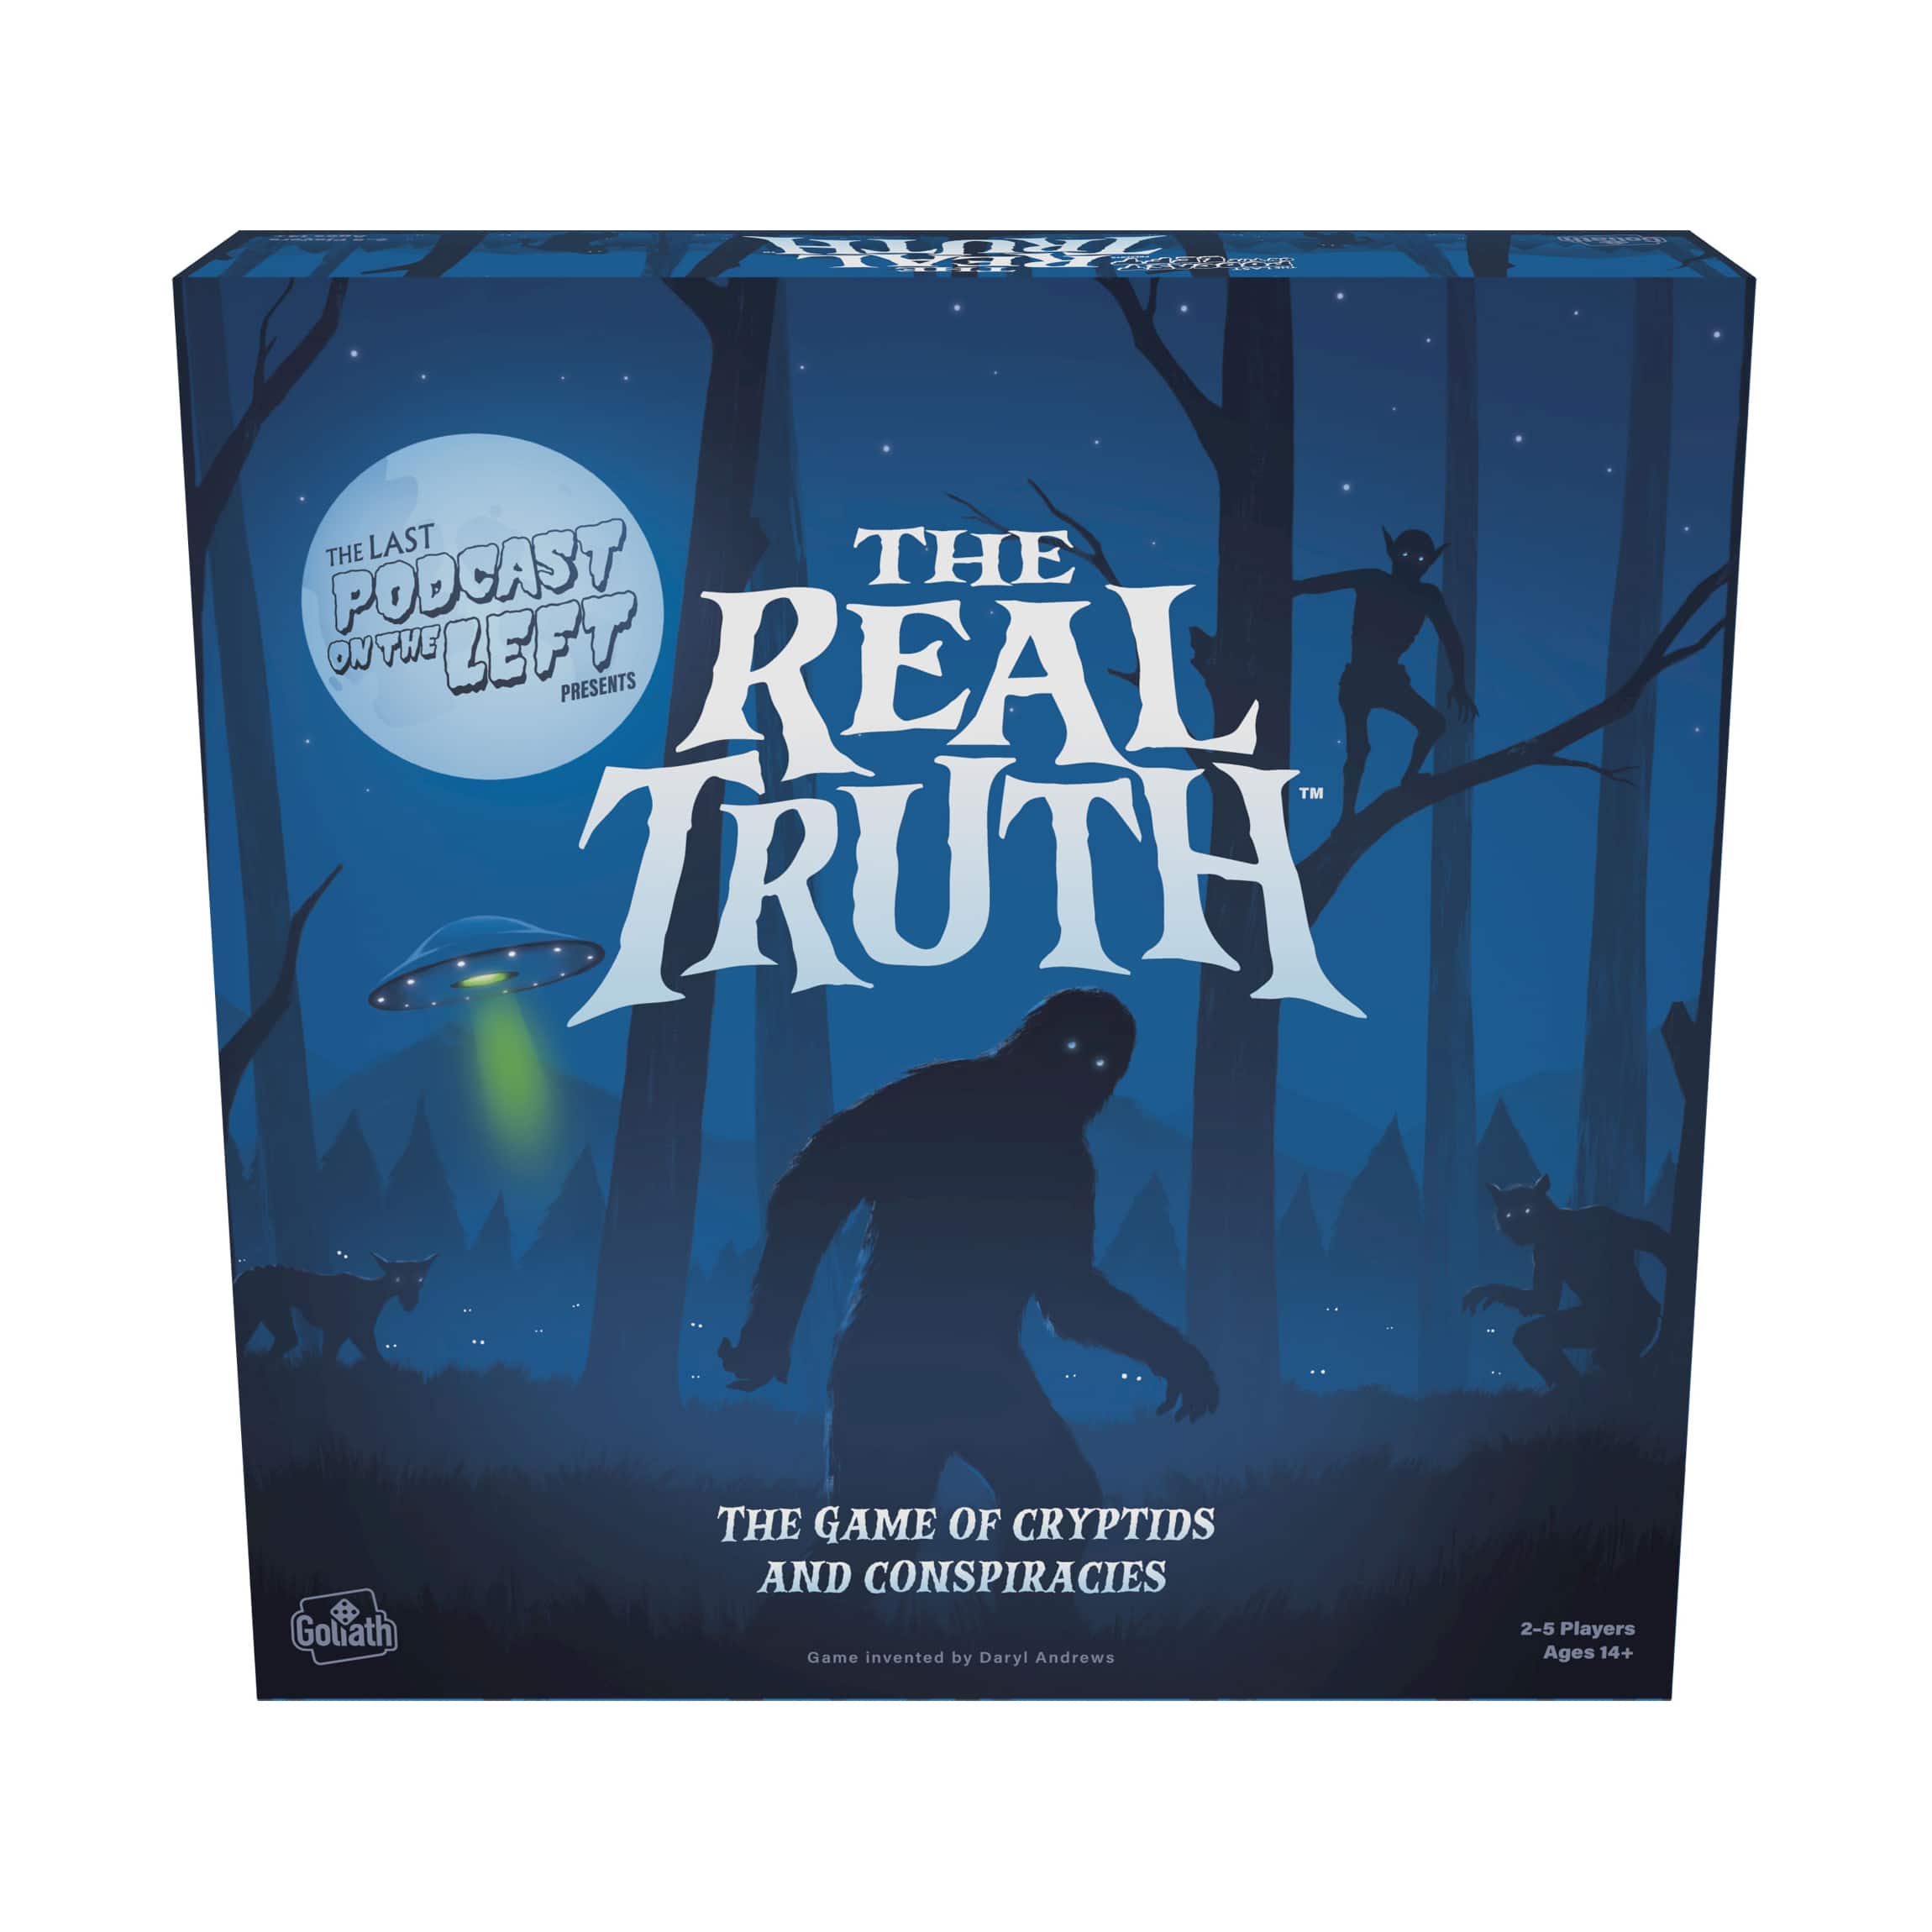 The Last Podcast on the Left Presents: The Real Truth - The Game of Creatures, Cryptids, and Conspiracies